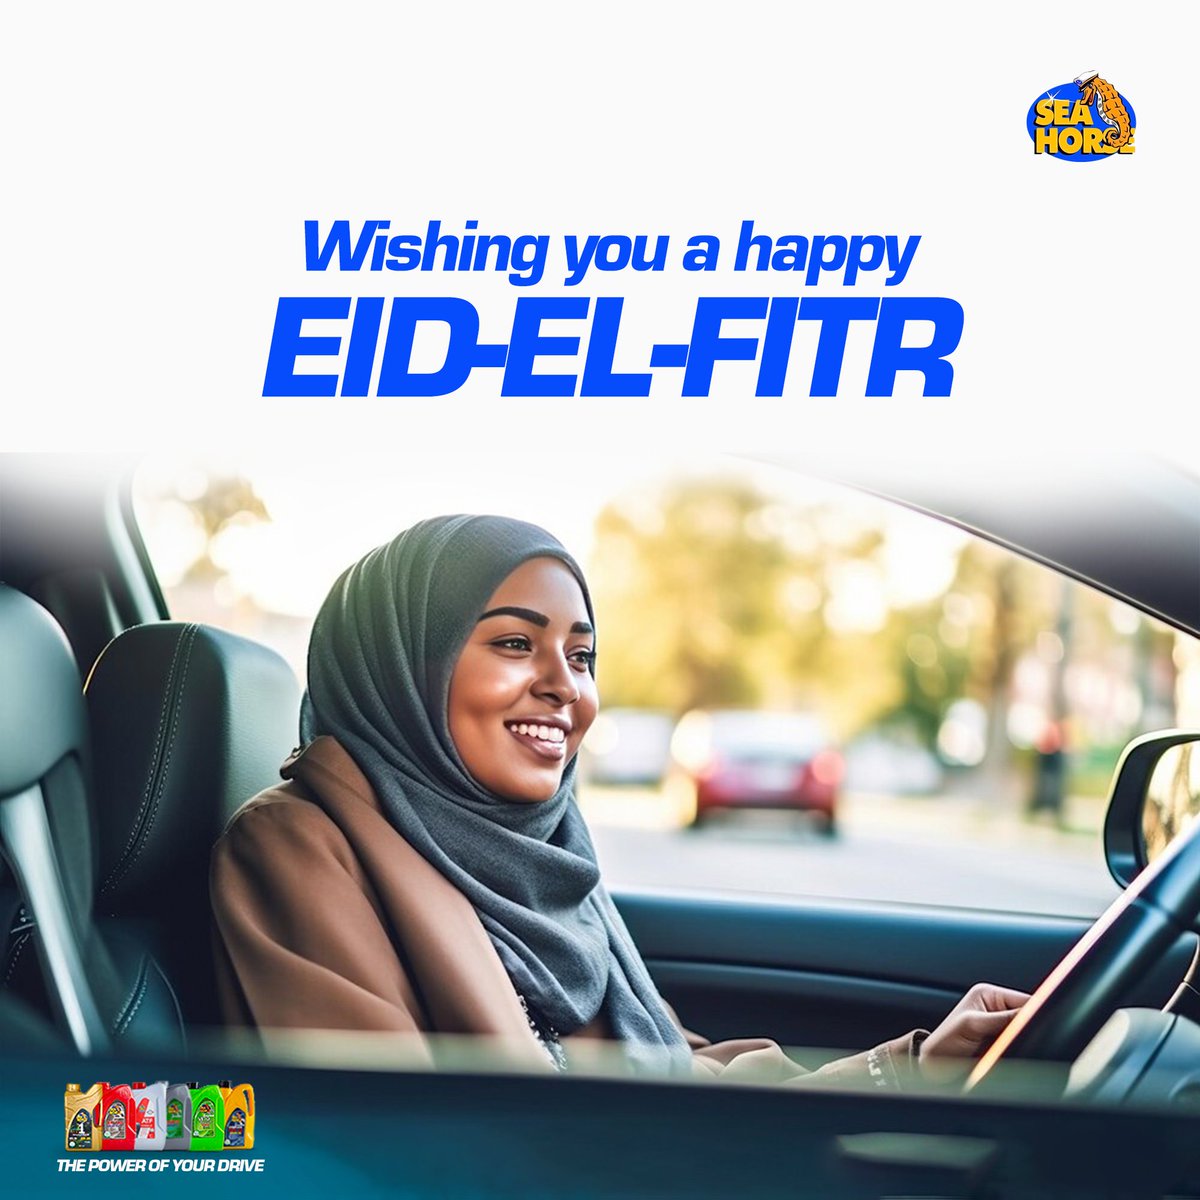 Wishing you a joyous Eid-el-Fitr celebration filled with love, laughter, and cherished moments with family and friends.

From all of us at Seahorse Lubricant Industries LTD.

#EidElFitr #BarkaDaSallah #SeaHorseLubricants #ThePowerOfYourDrive